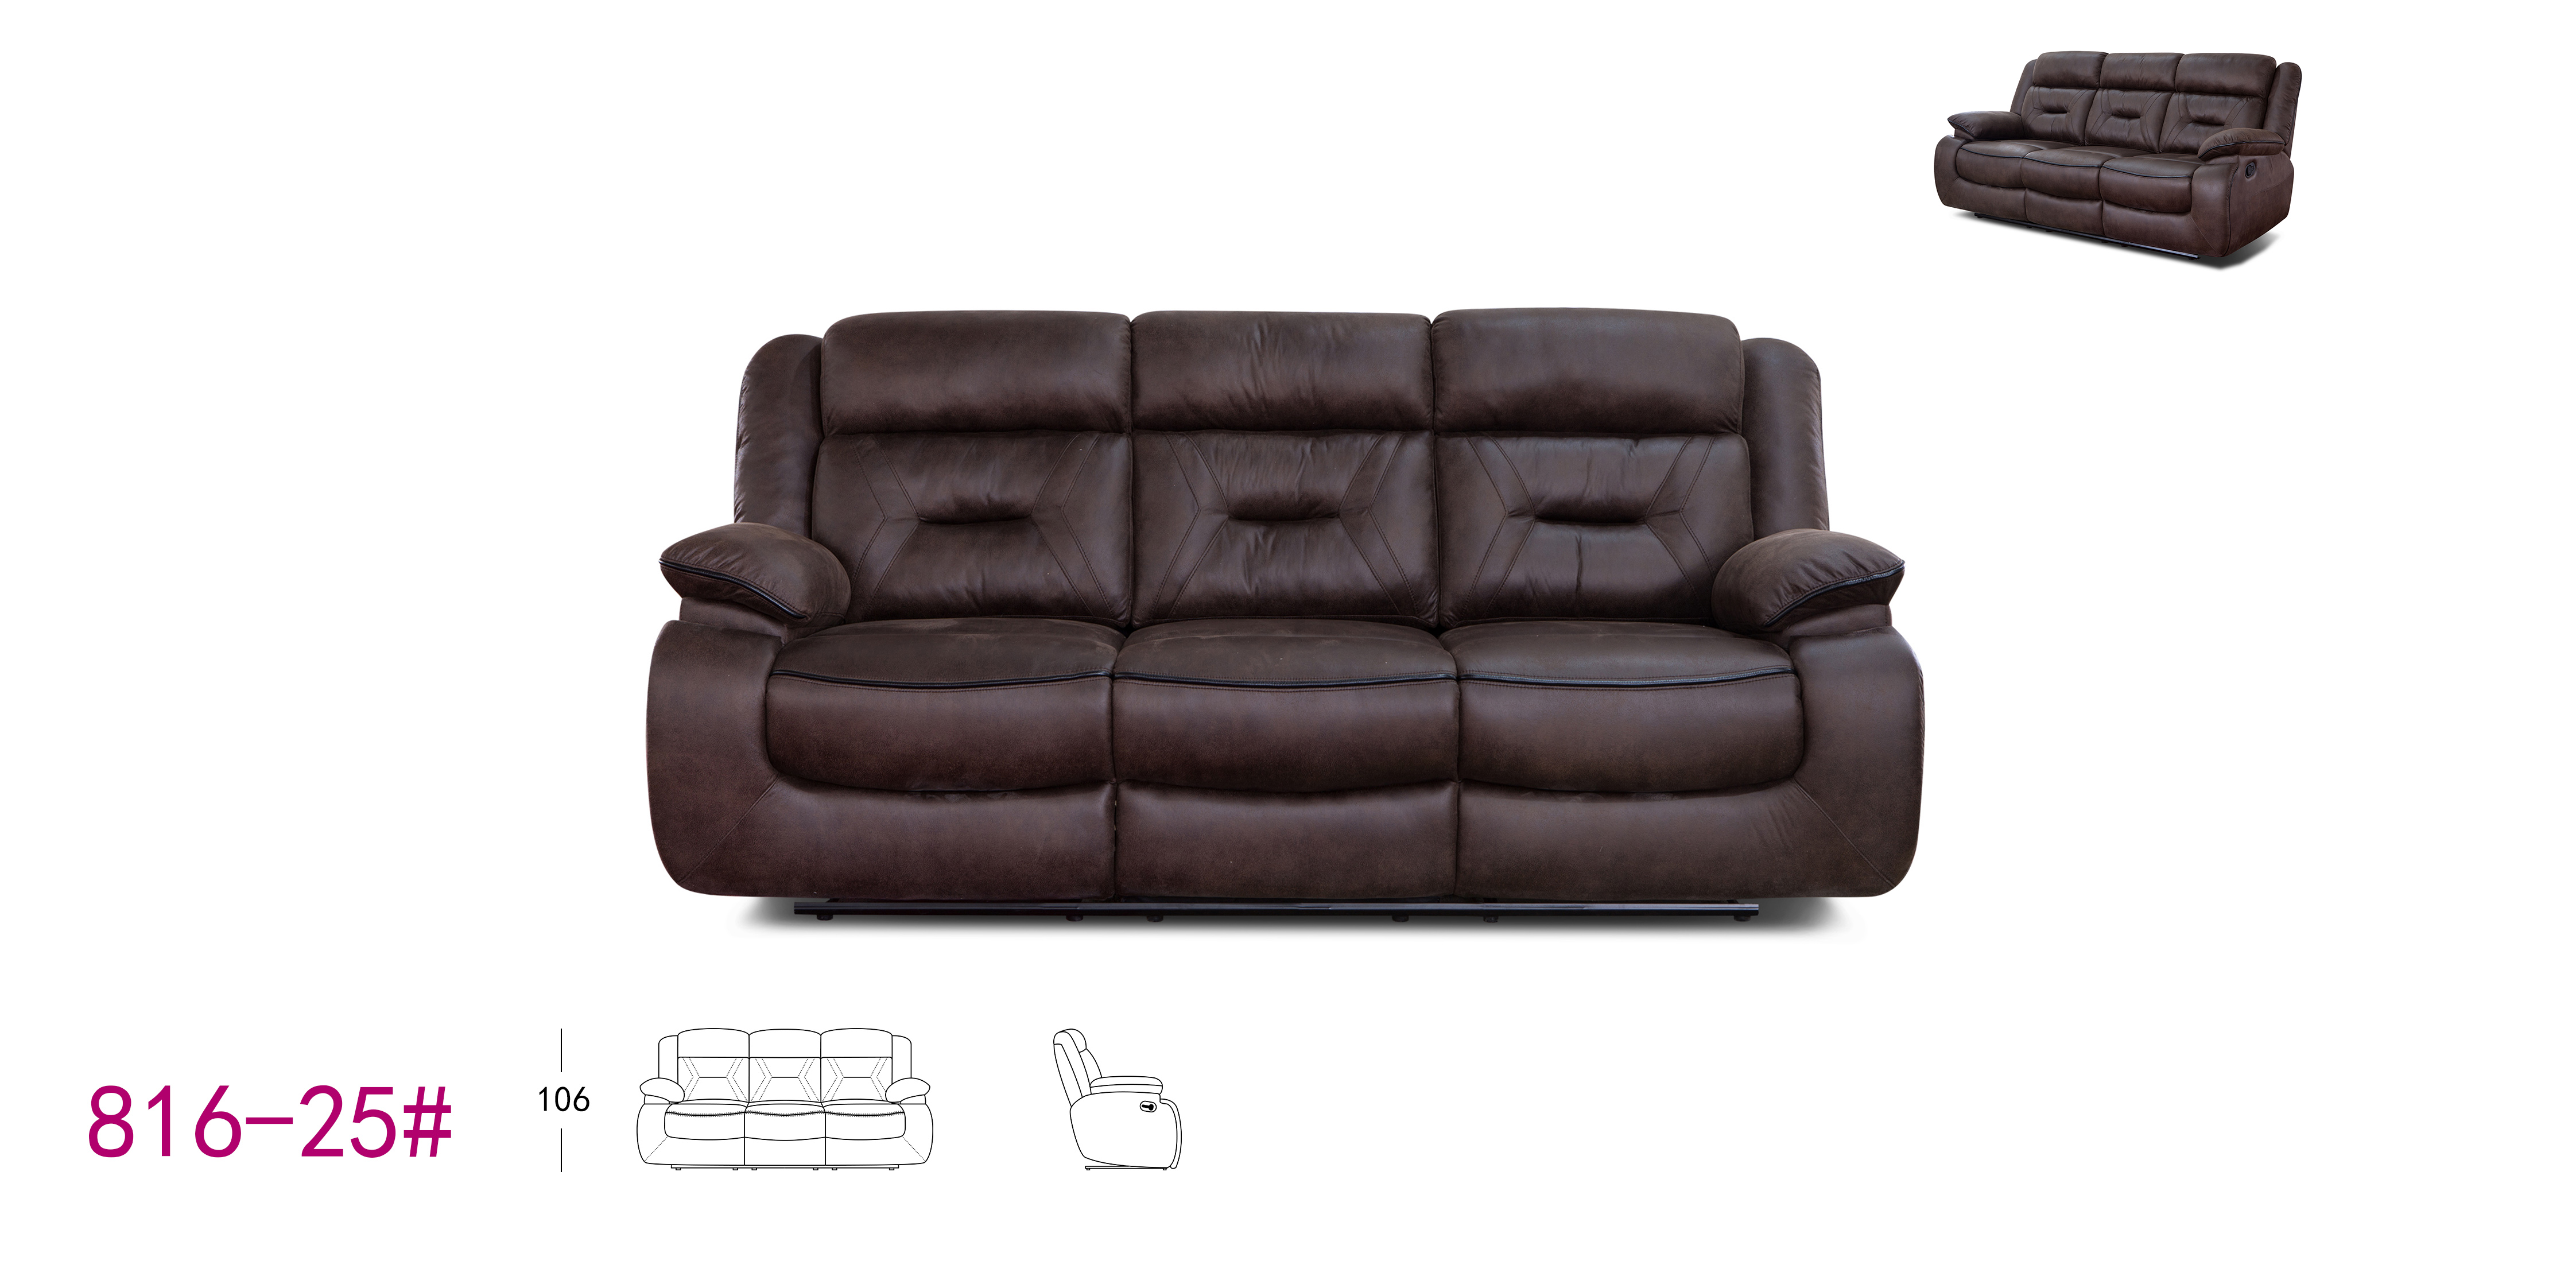 Popular Design for Electric Recliner Sofa - Home cinema leather recliner relax 3 seater sofa electric – Chuan Yang detail pictures